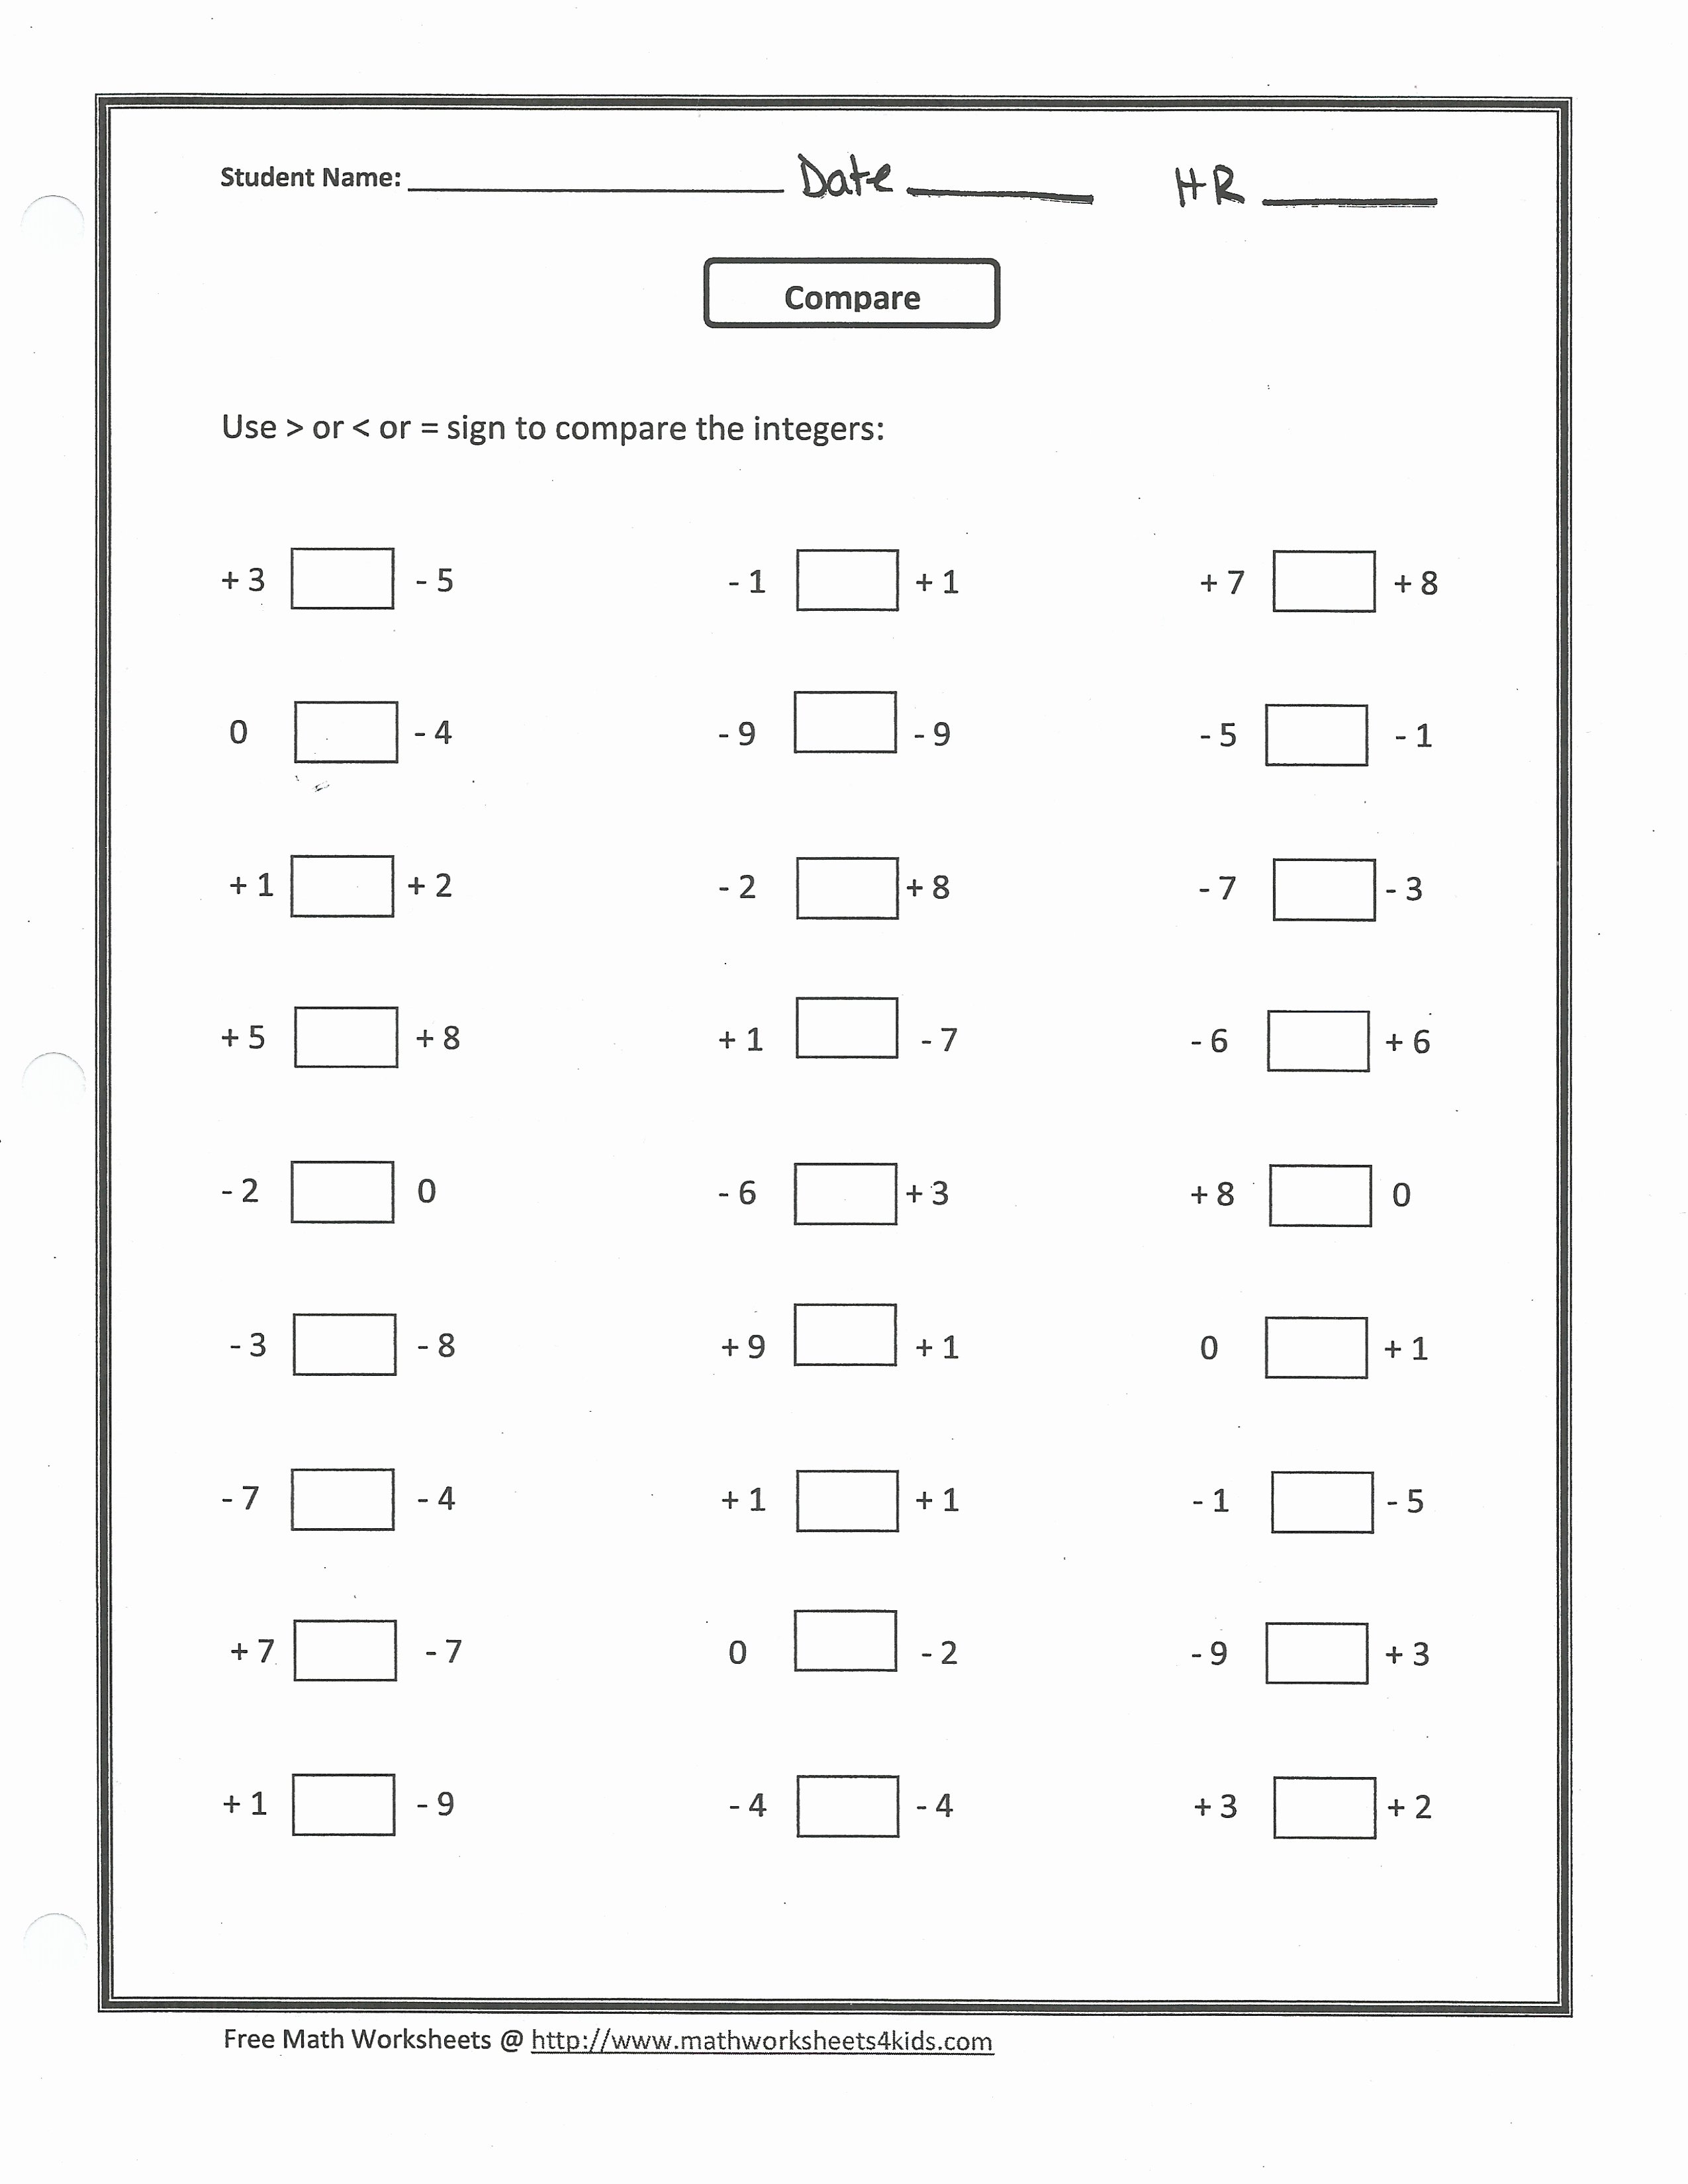 Integers and Absolute Value Worksheet Fresh Integers and Absolute Value Worksheet Answers the Best